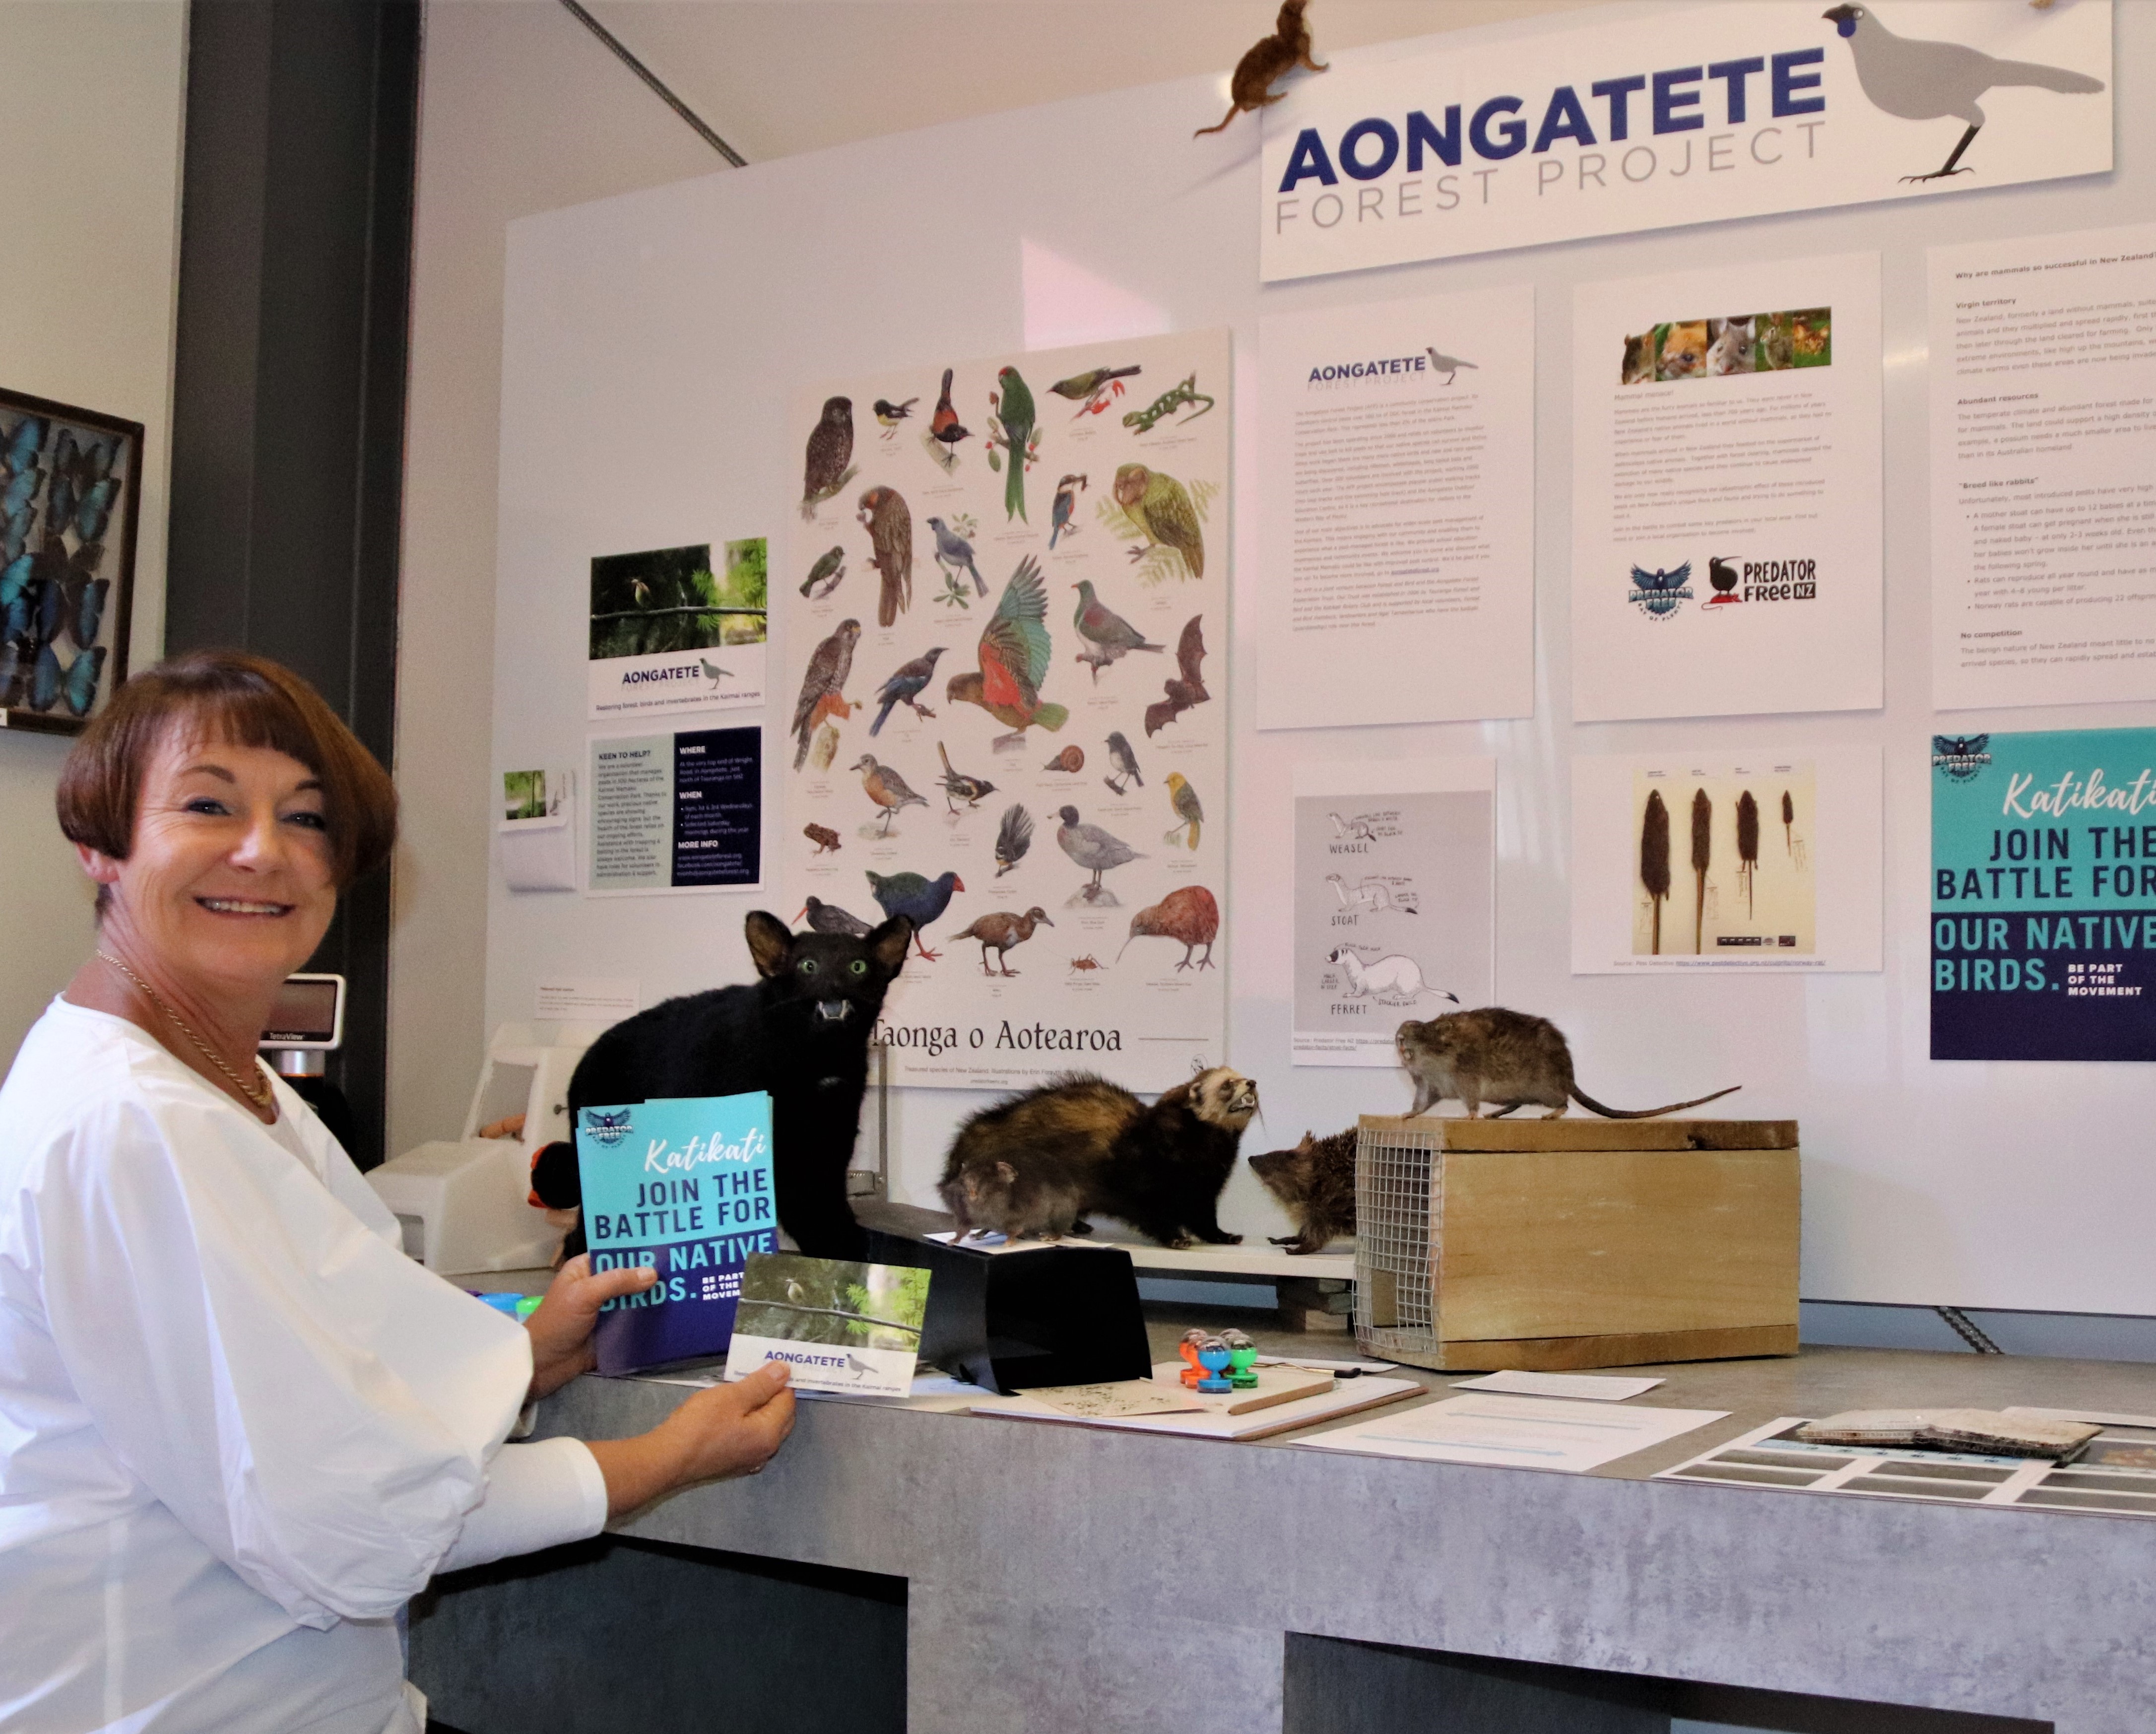 Museum Manager Paula Gaelic shows the Aongatete Forest Project interactive exhibition.